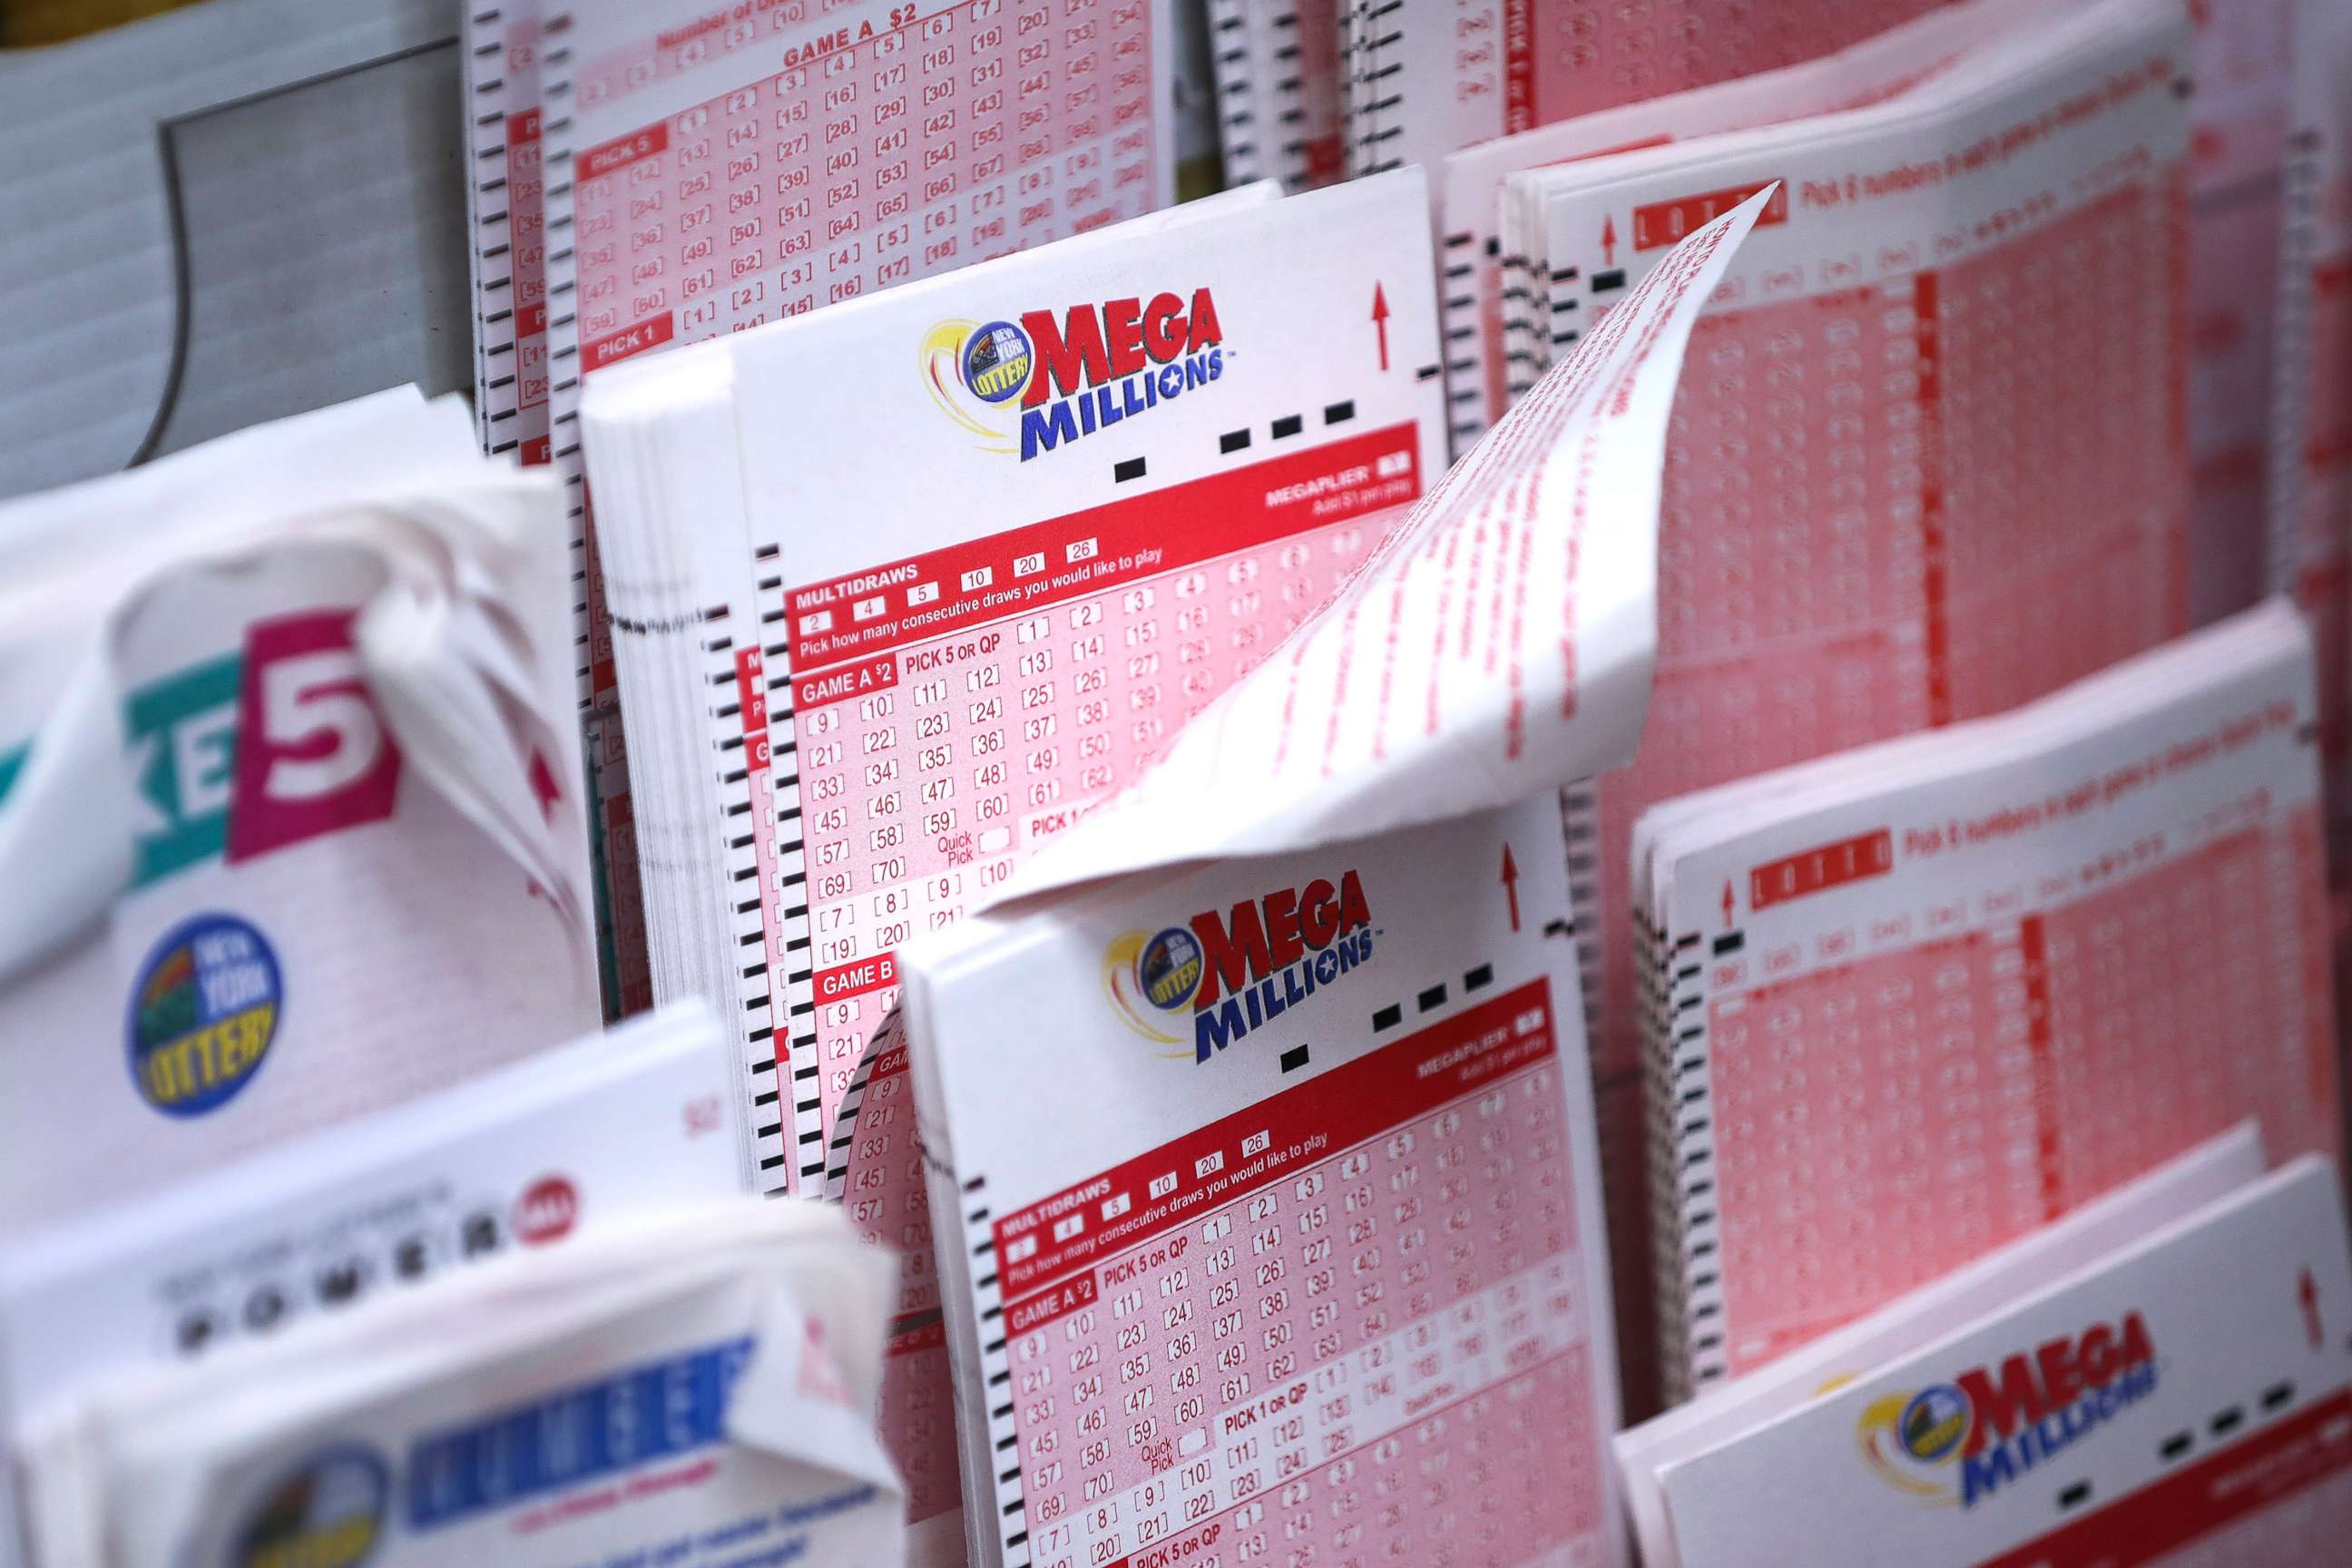 PHOTO: Mega Millions lottery tickets sit inside a convenience store in Lower Manhattan, Oct. 23, 2018, in New York.